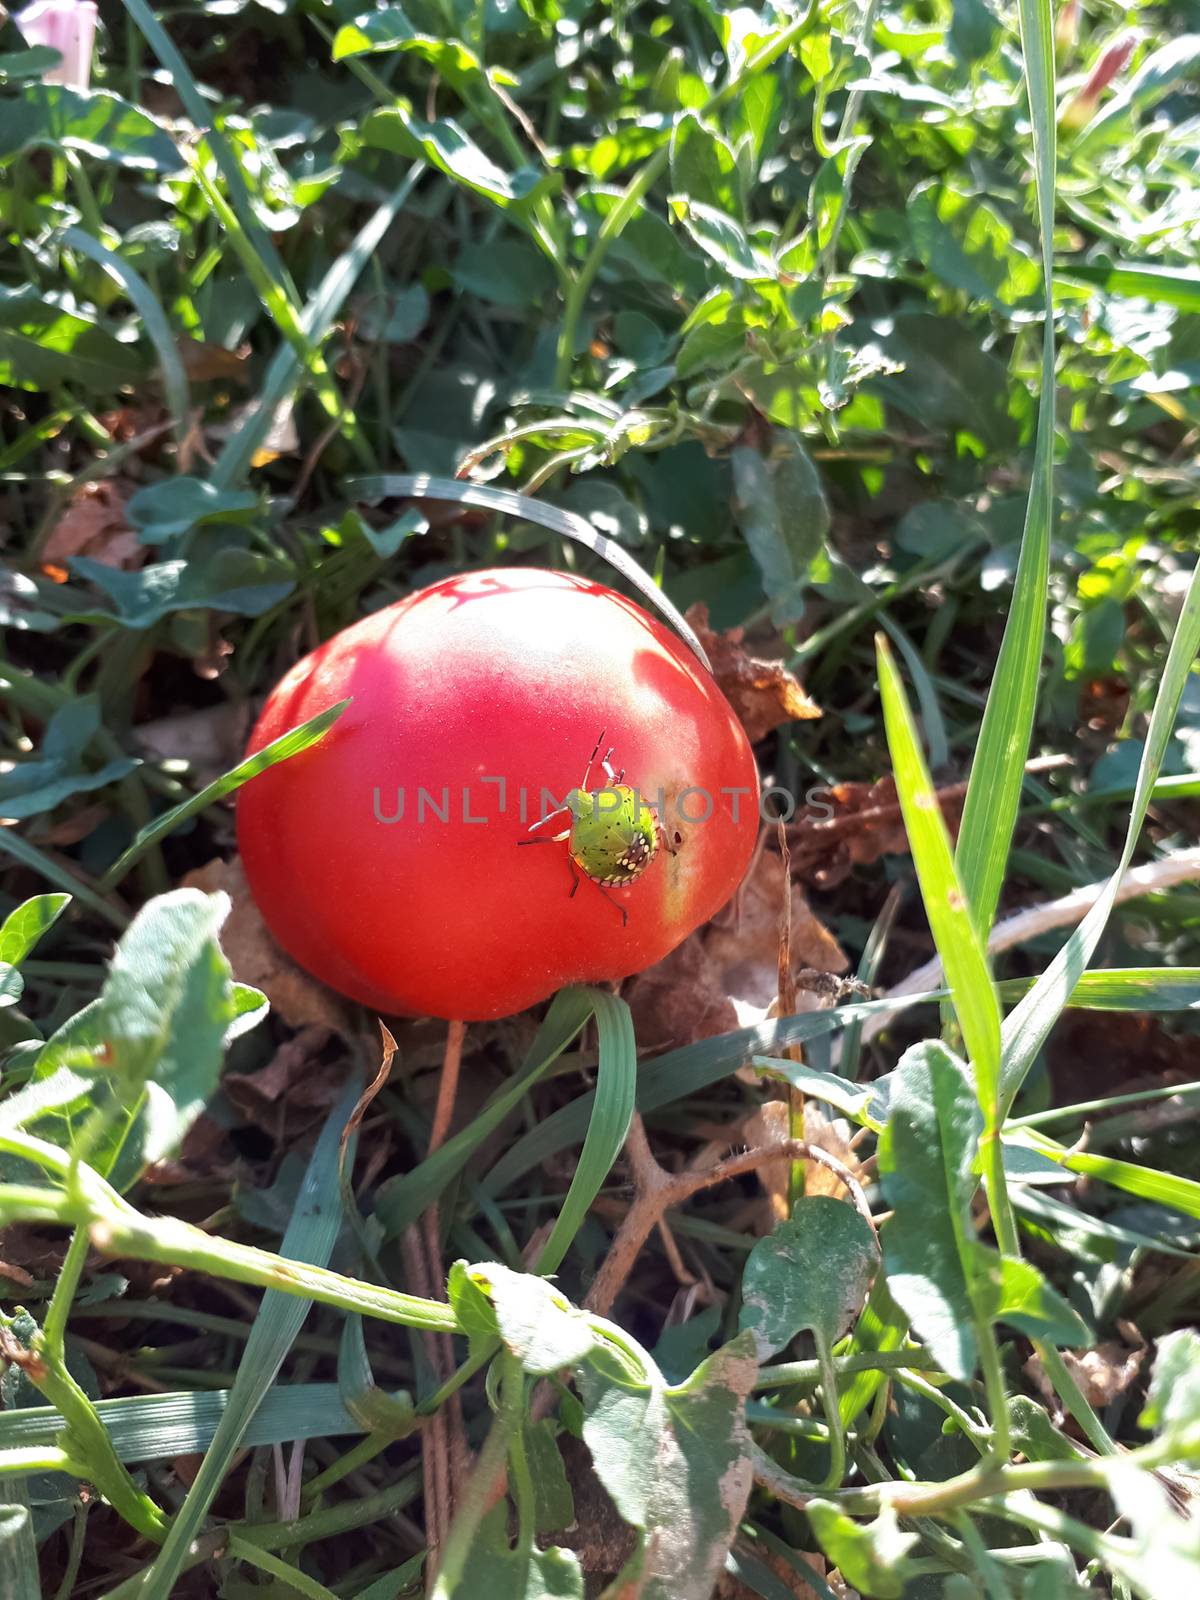 The bedbug sits on a red tomato. Tomato pest